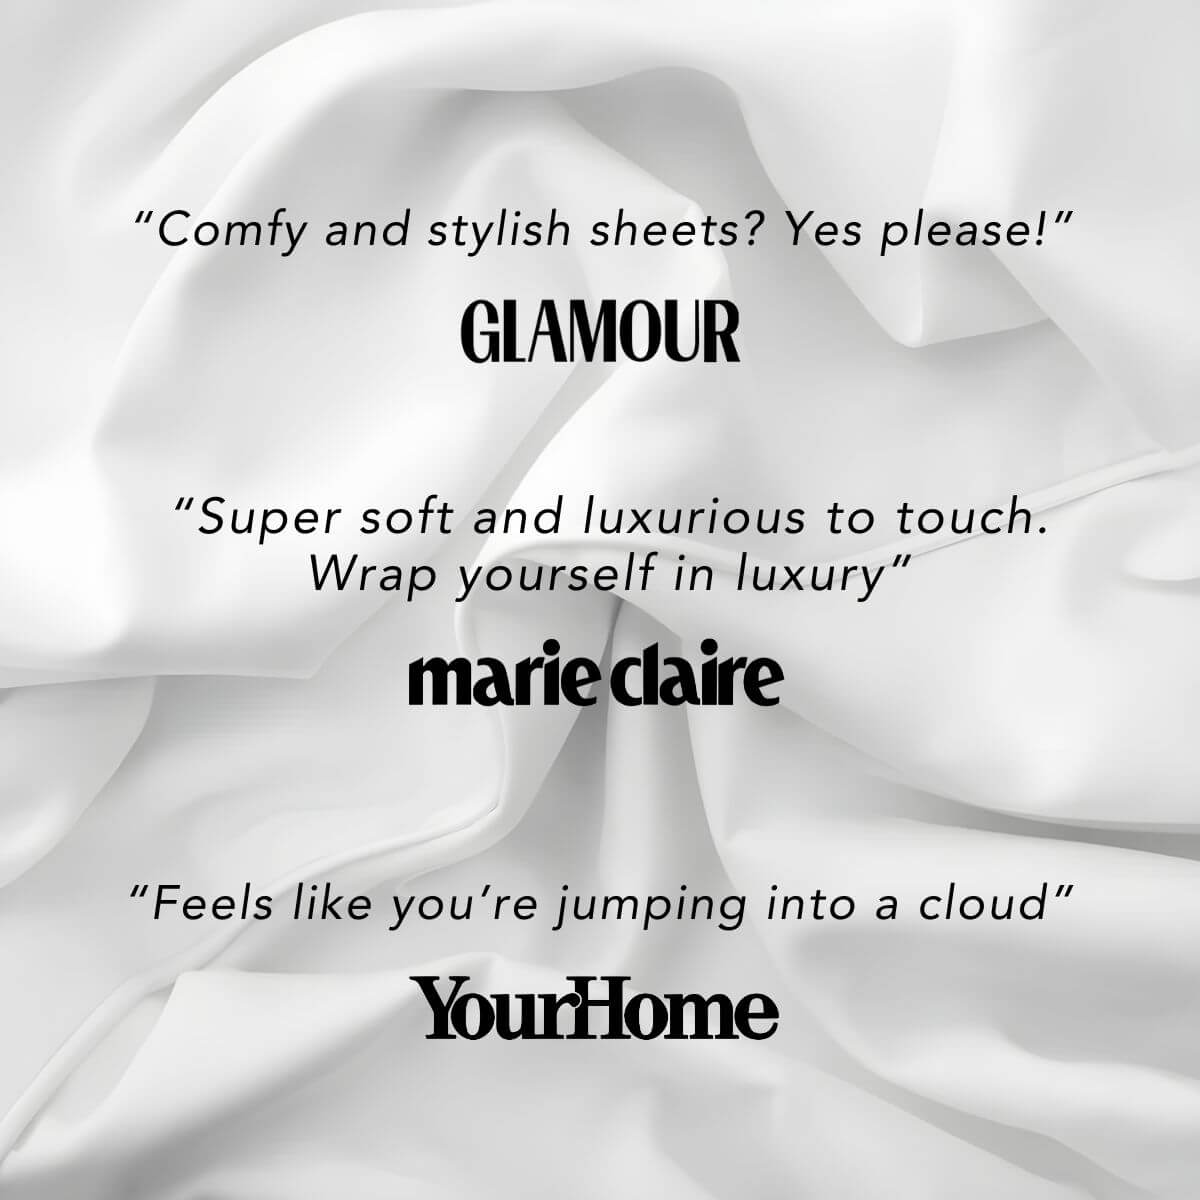 "Comfy and stylish sheets? Yes please!" GLAMOUR